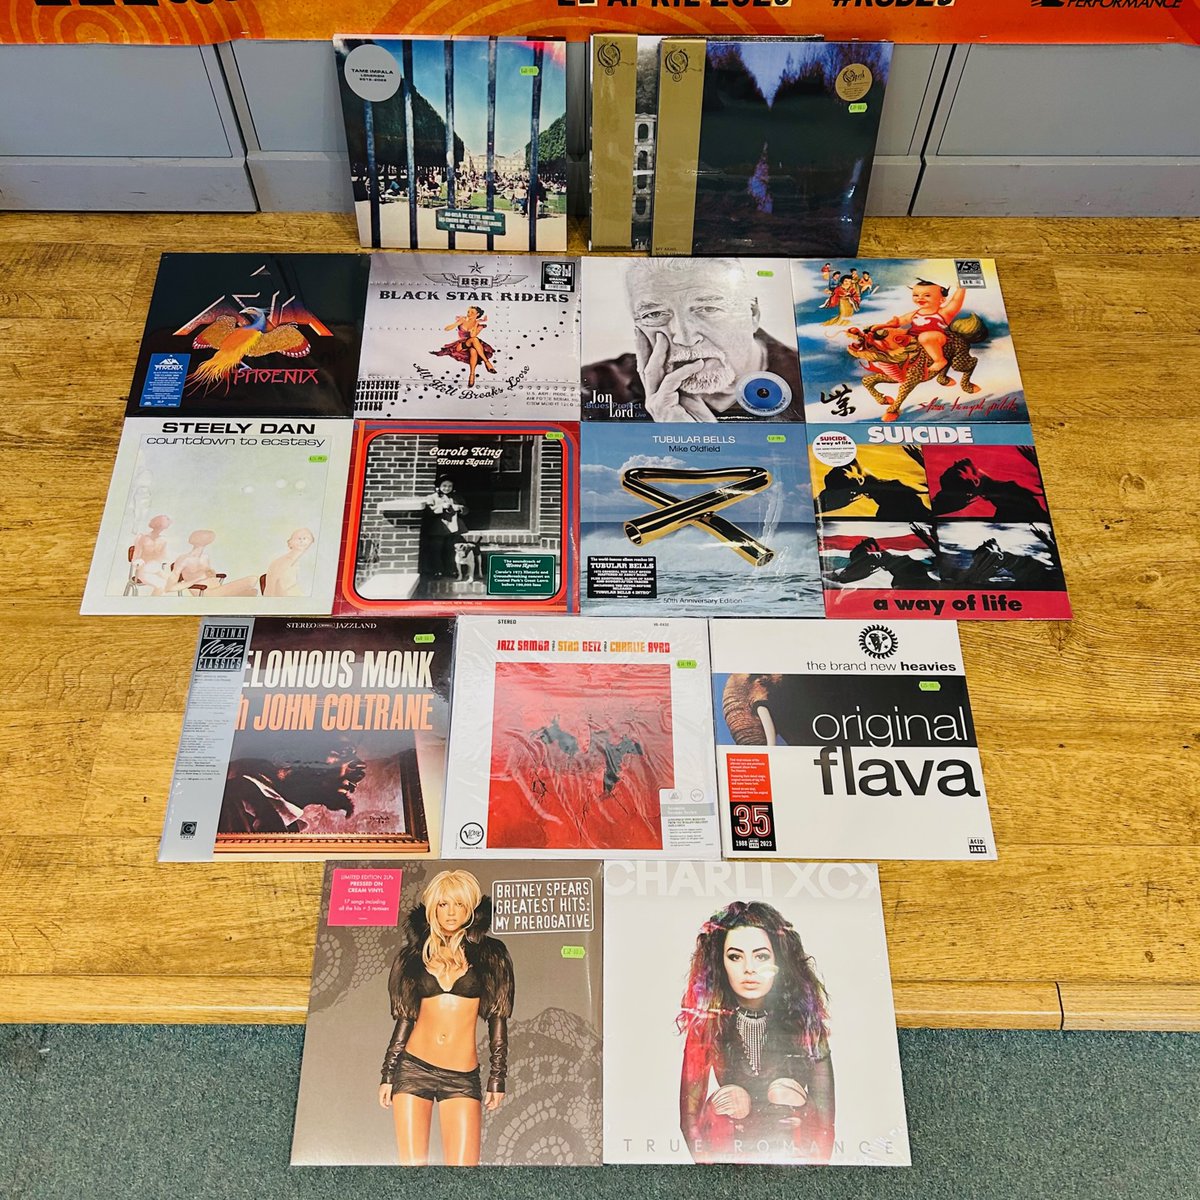 'Tubular Bells' 50th anniversary, @tameimpala 'Lonerism' 10th anniversary, Carole King live plus reissues from Steely Dan, Suicide, @OfficialOpeth, @charli_xcx, Britney, @BlackStarRiders, @BrandNewHeavies and more #WaxUpdate